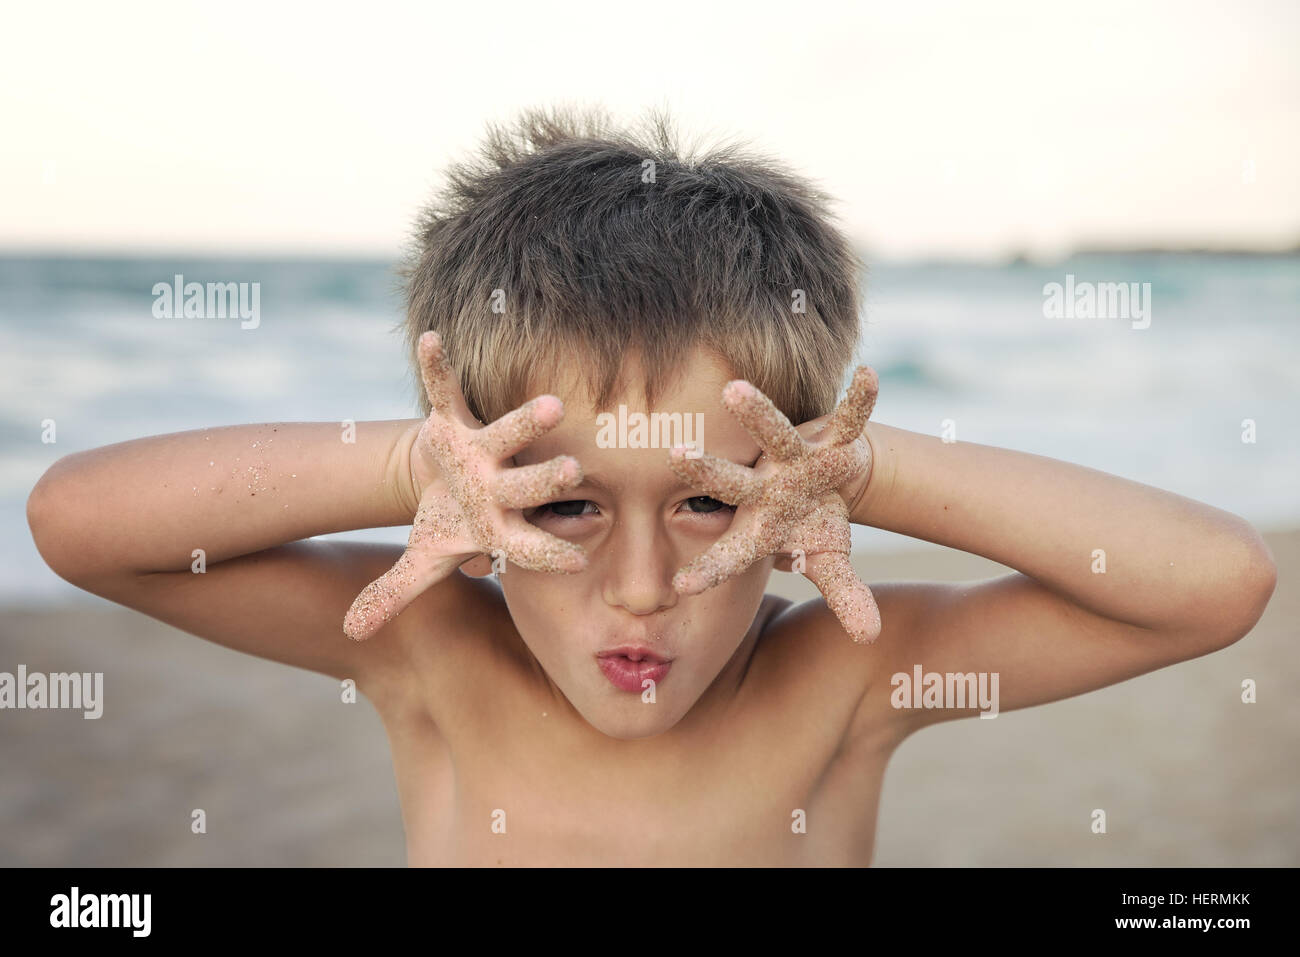 Boy standing on beach messing about with hands in front of face Stock Photo